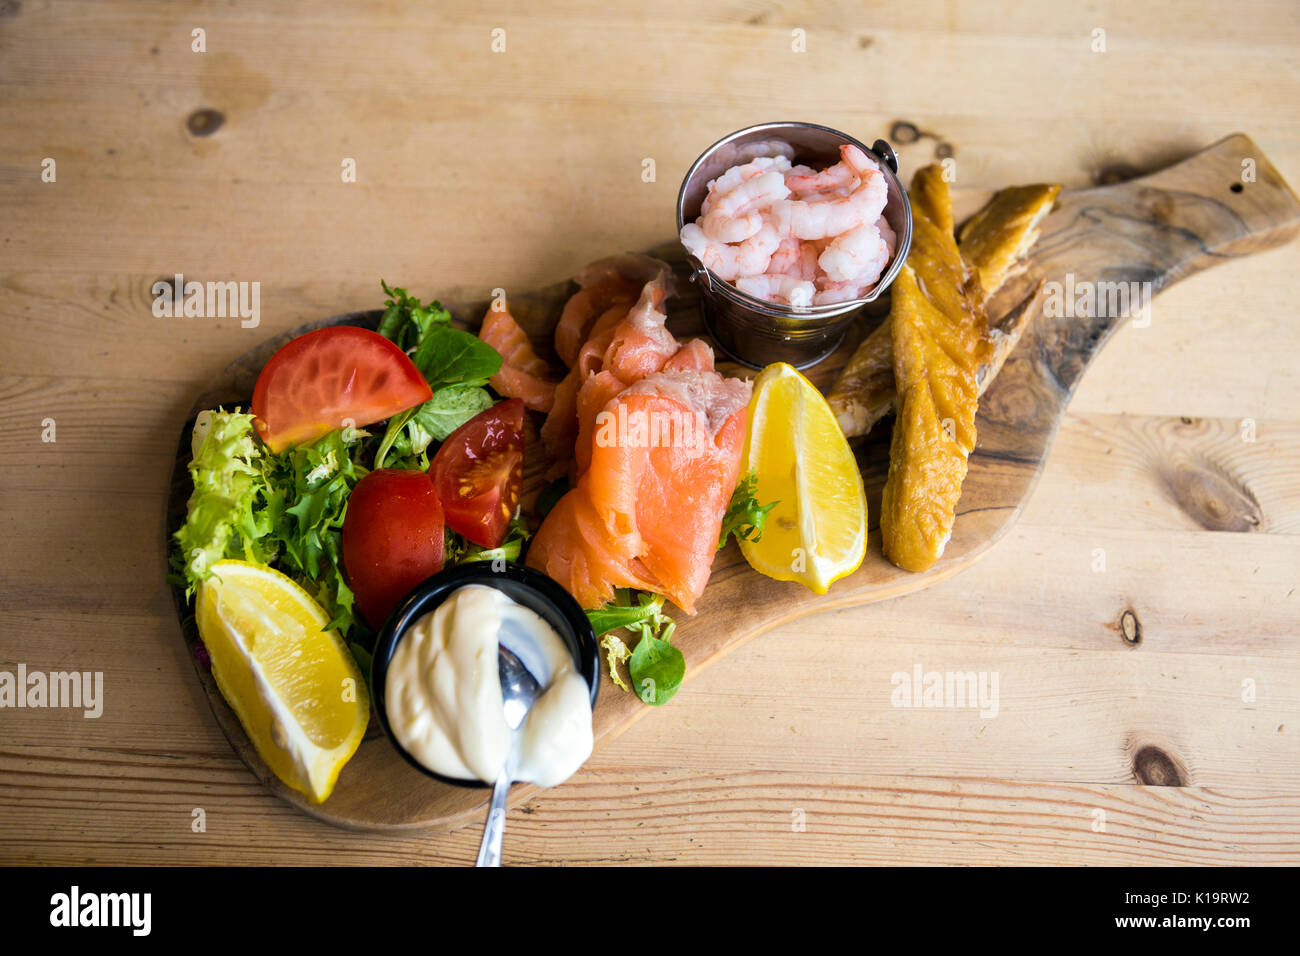 Seafood platter on a wooden cutting board and wooden table, prawns, mackerel, smoked salmon, salad Stock Photo